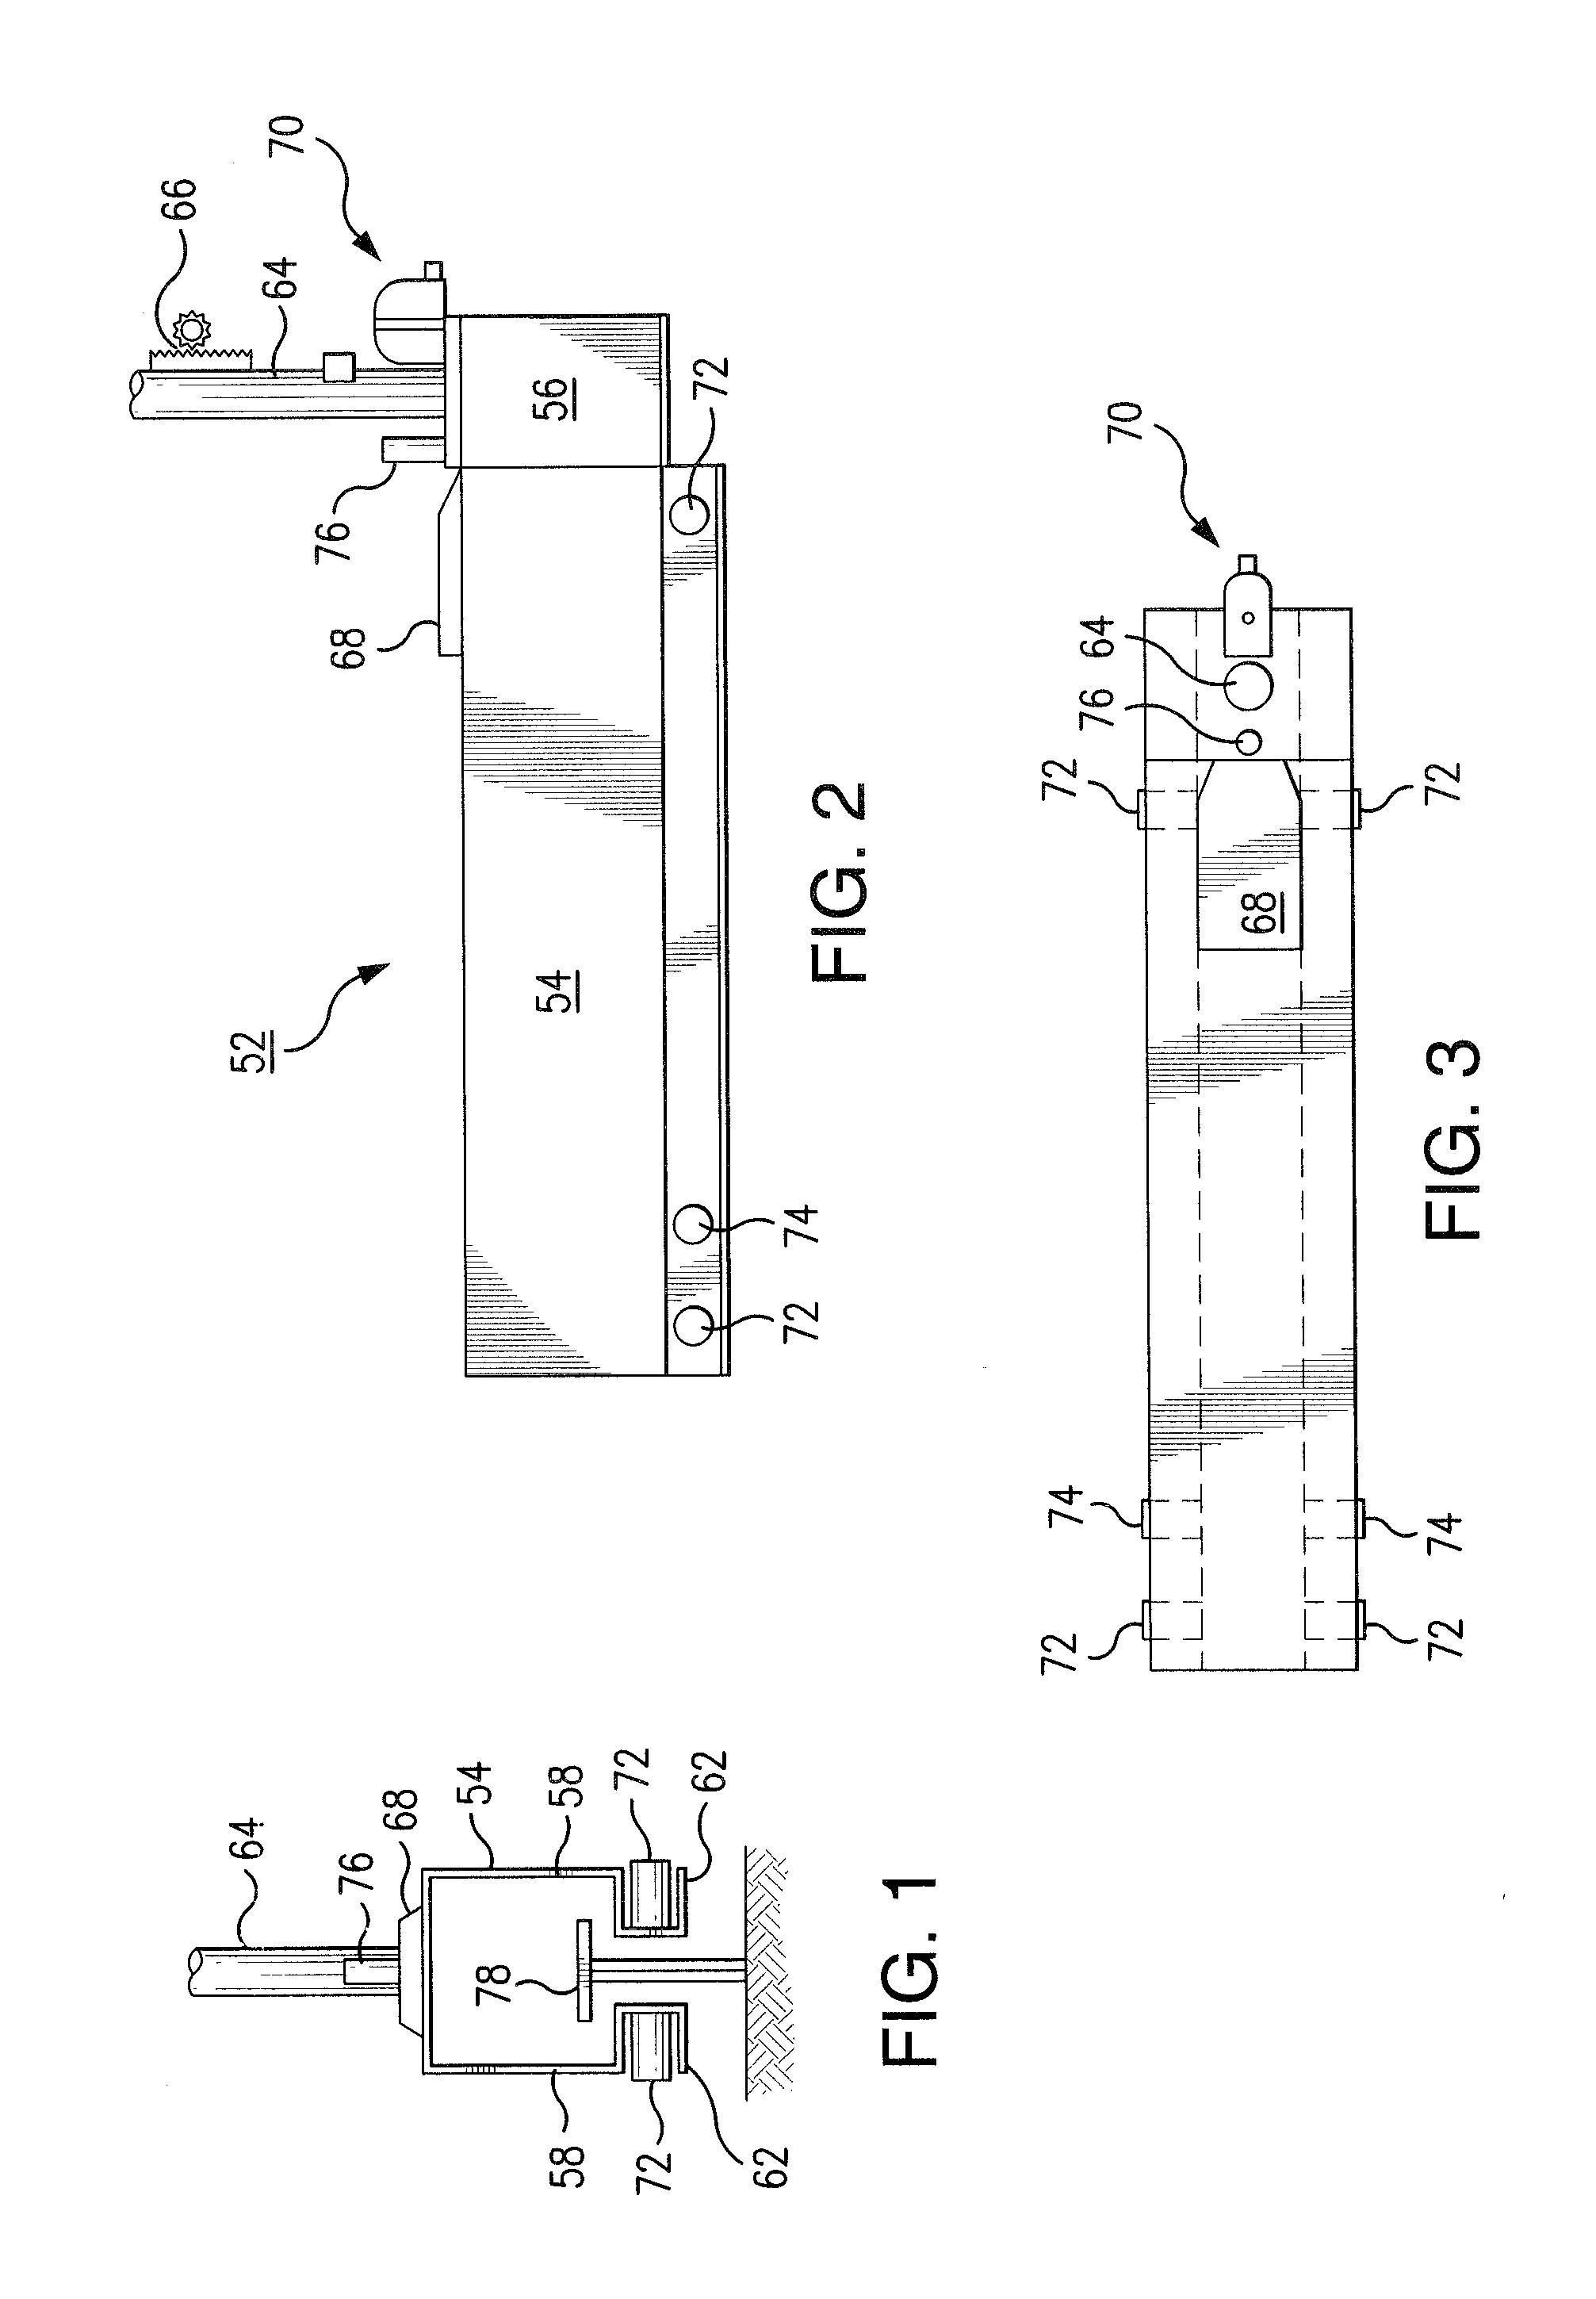 System for Automated Vehicle Operation and Control